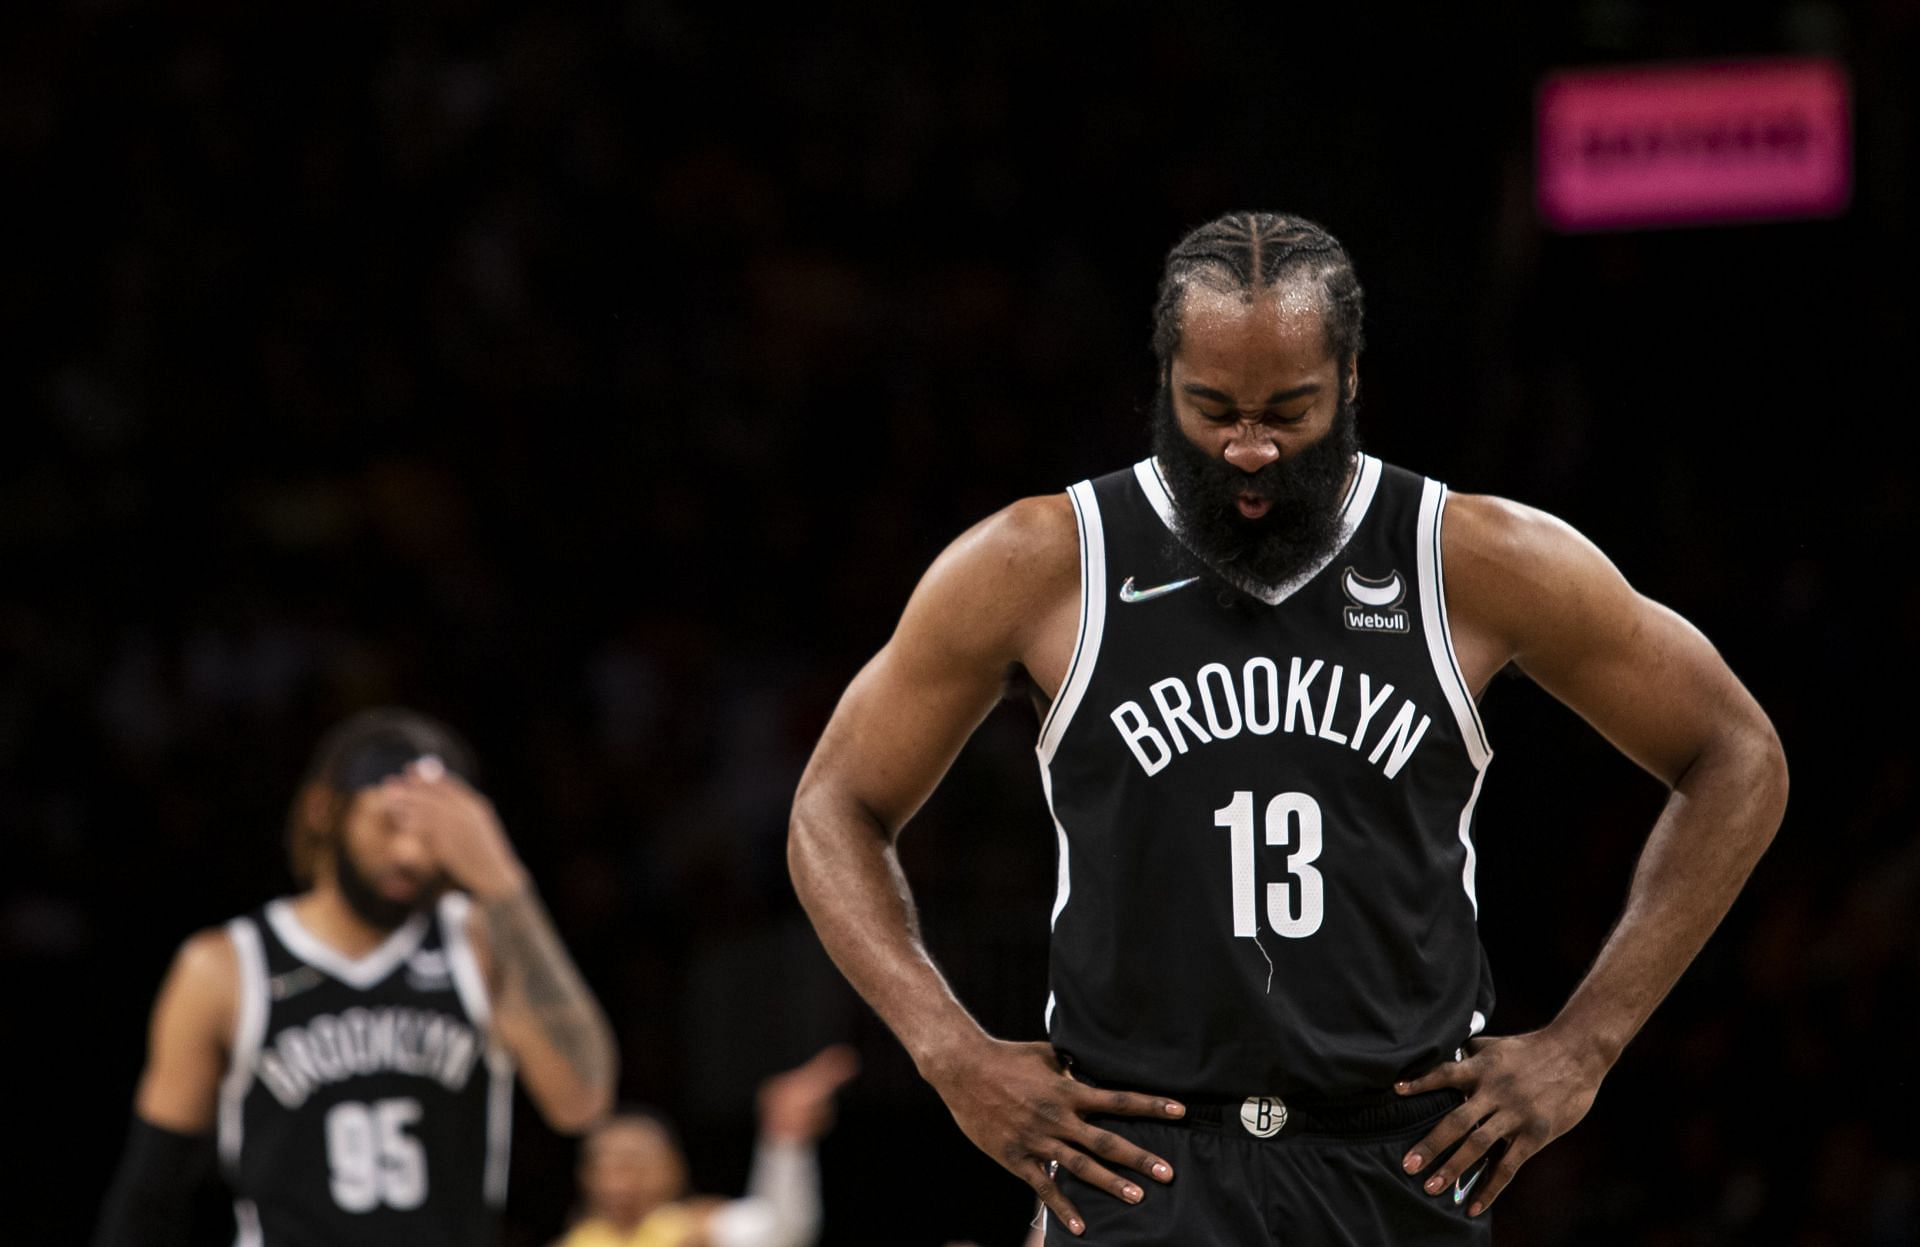 James Harden of the Brooklyn Nets reacts against the LA Lakers at Barclays Center on Jan. 25 in New York City.